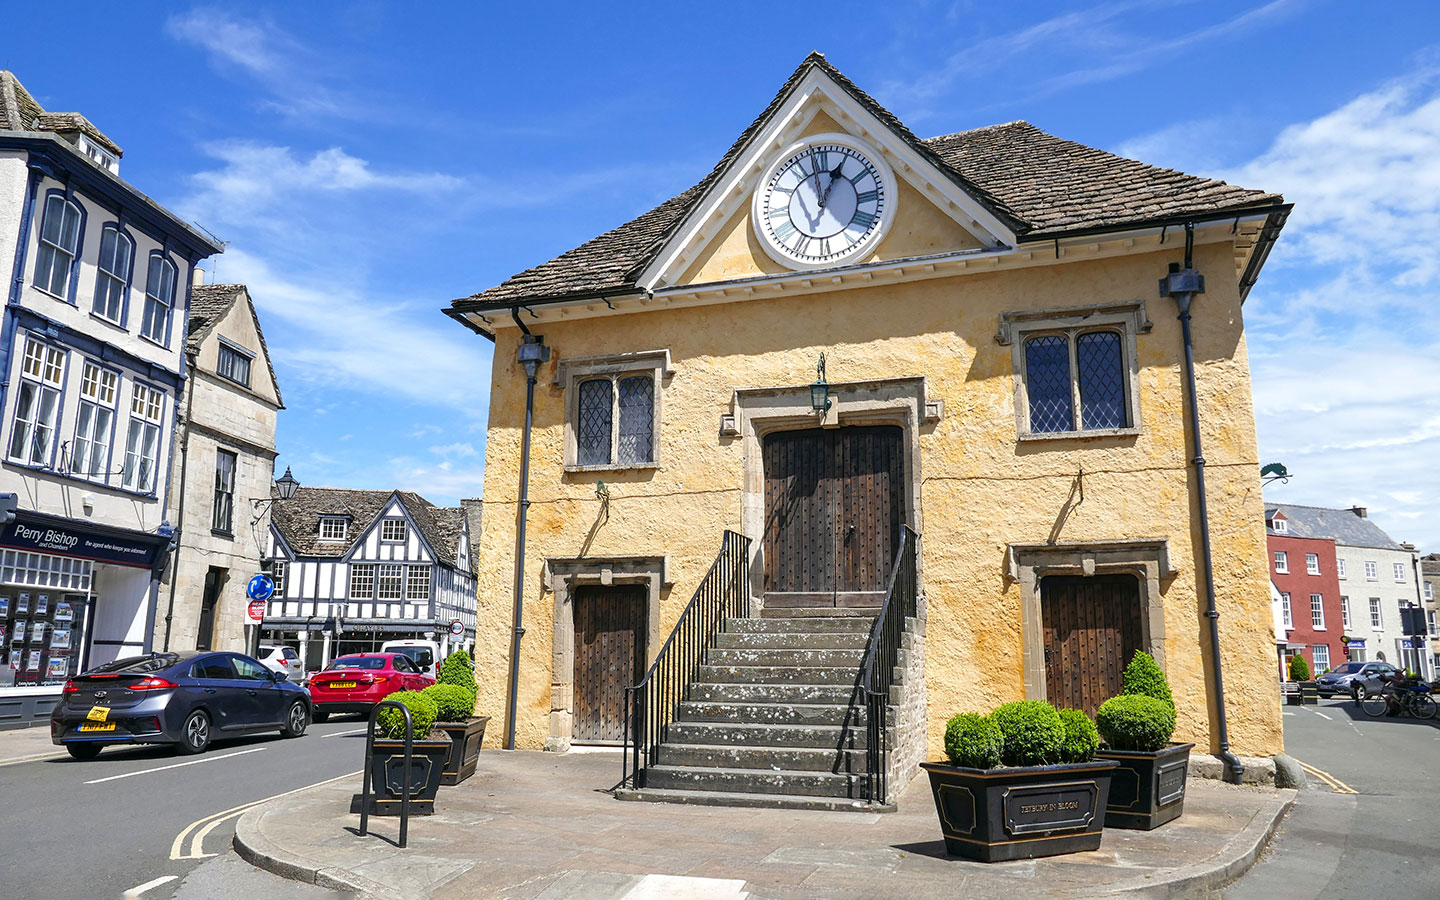 Visiting Tetbury, Cotswolds: A local’s guide